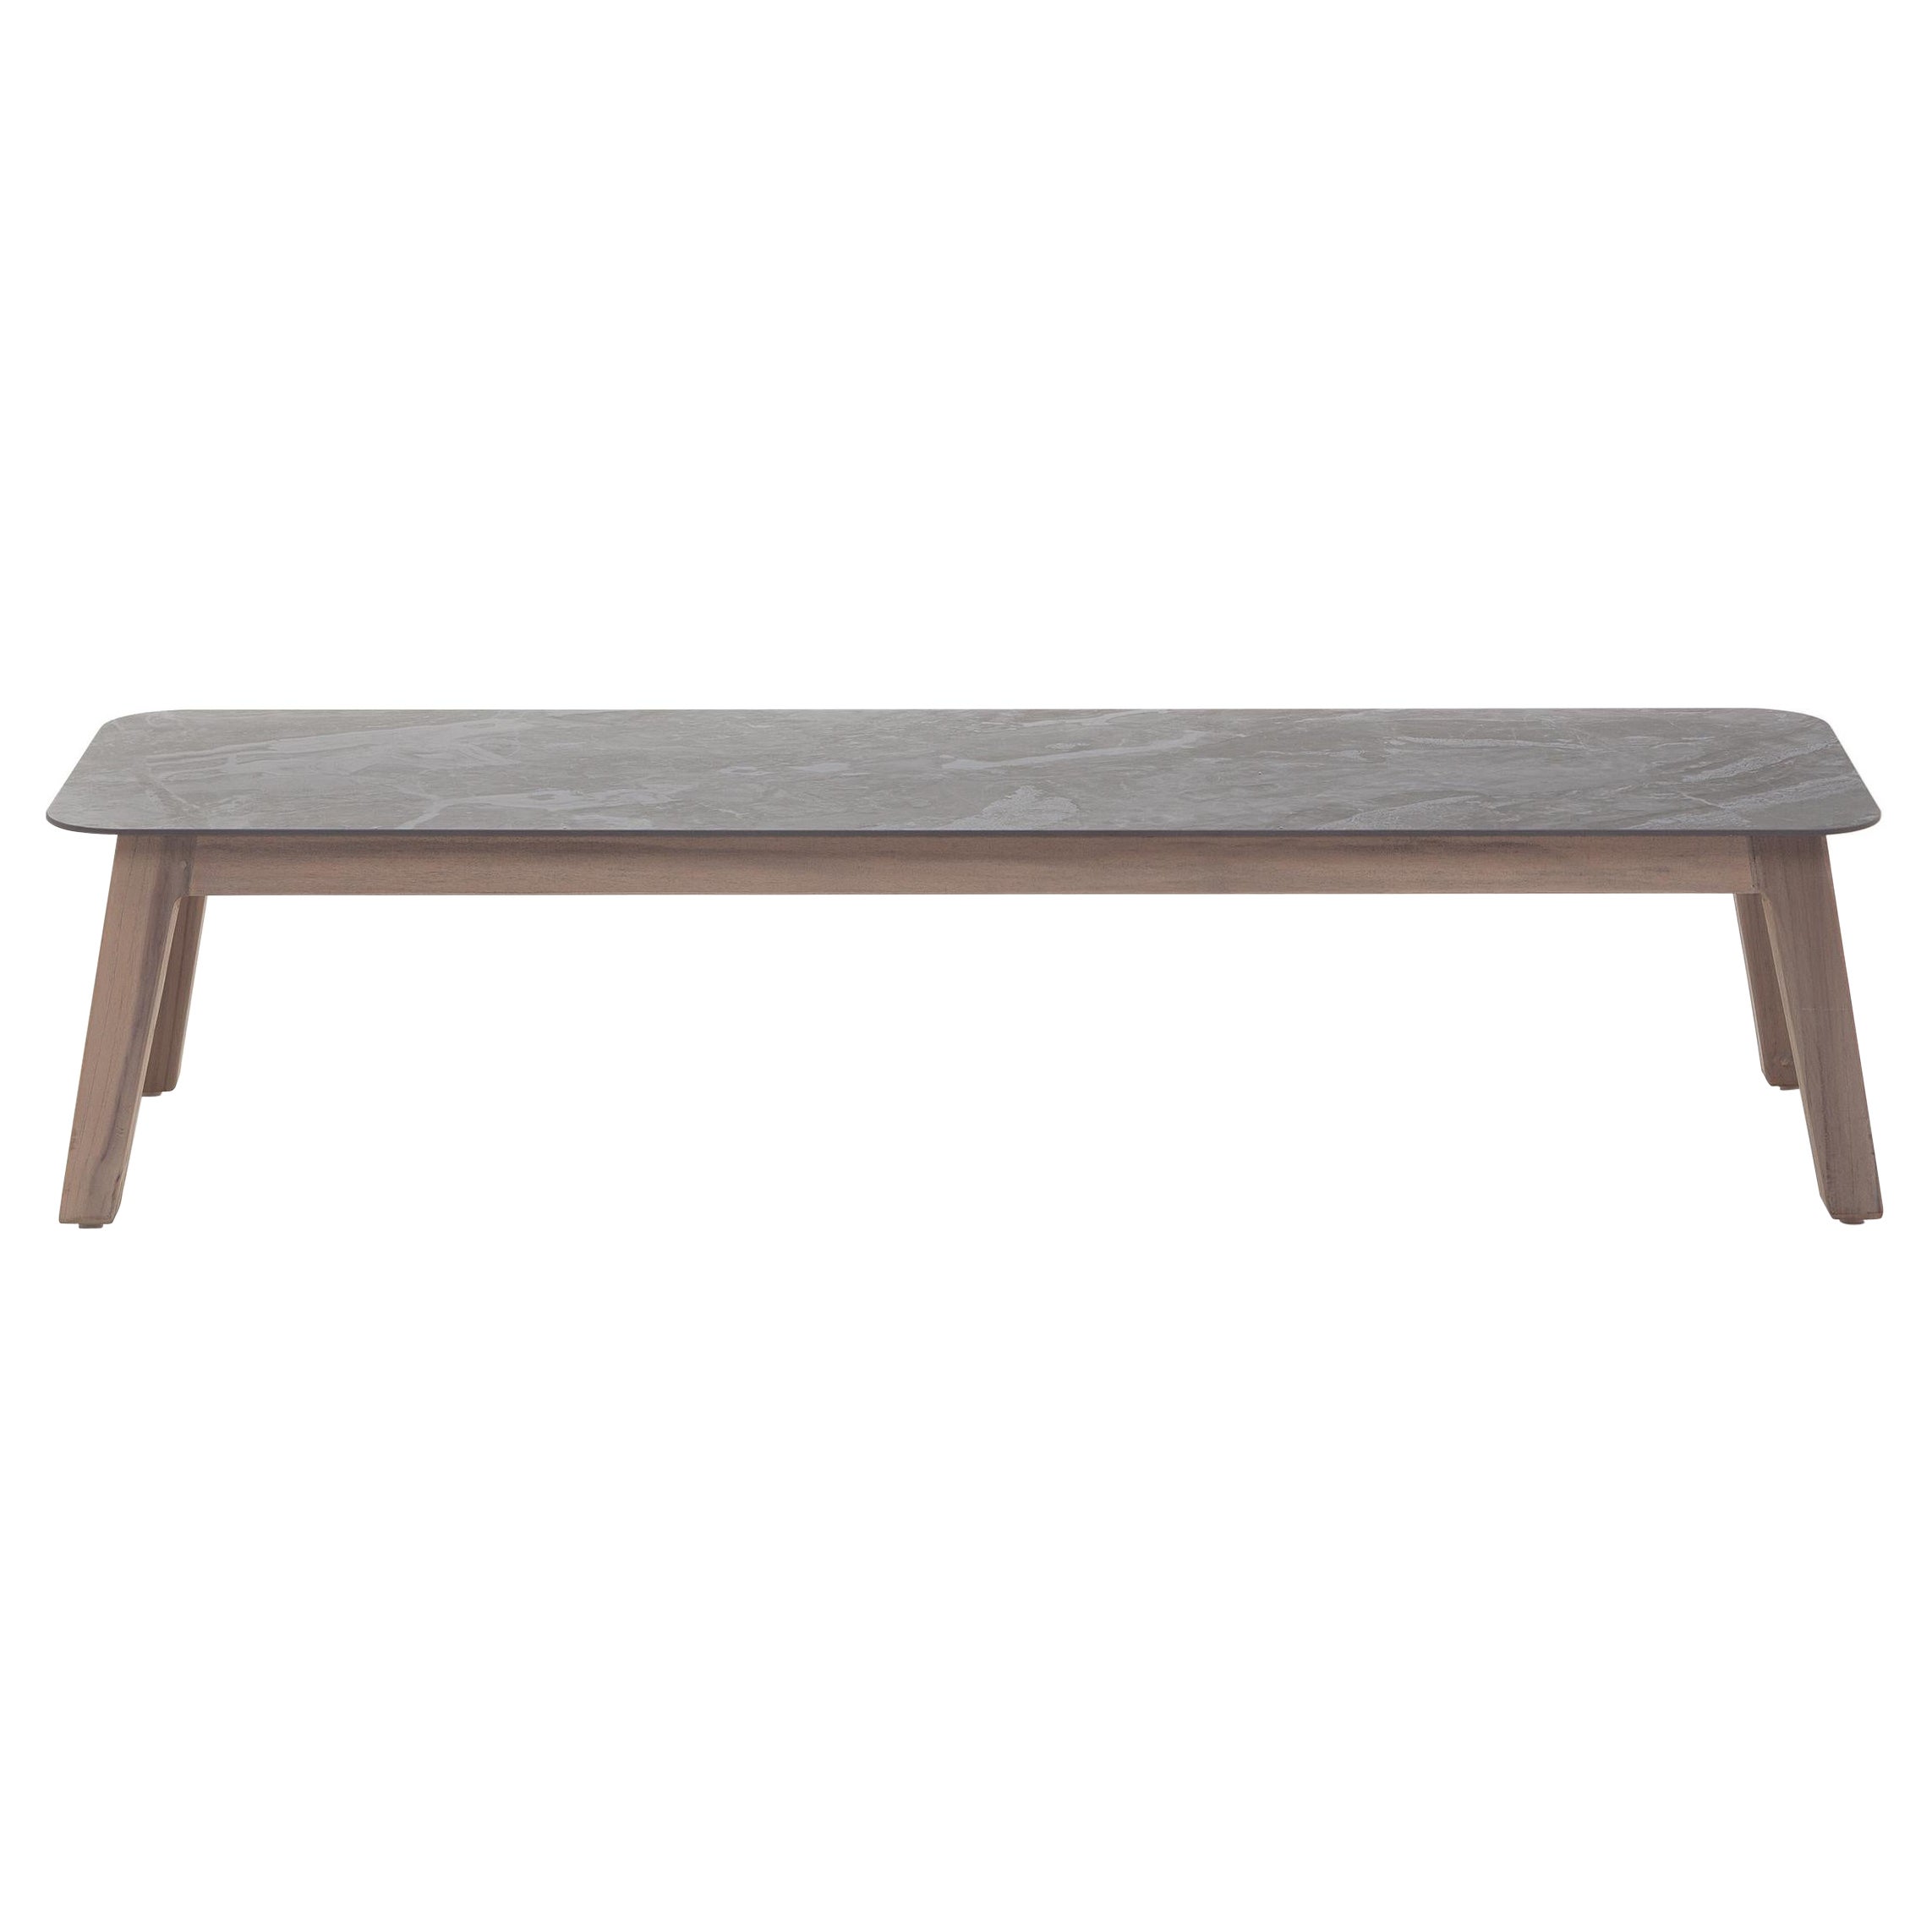 Gervasoni Inout 867 Coffee Table in Grey Porcelain Stoneware Top and Washed Teak